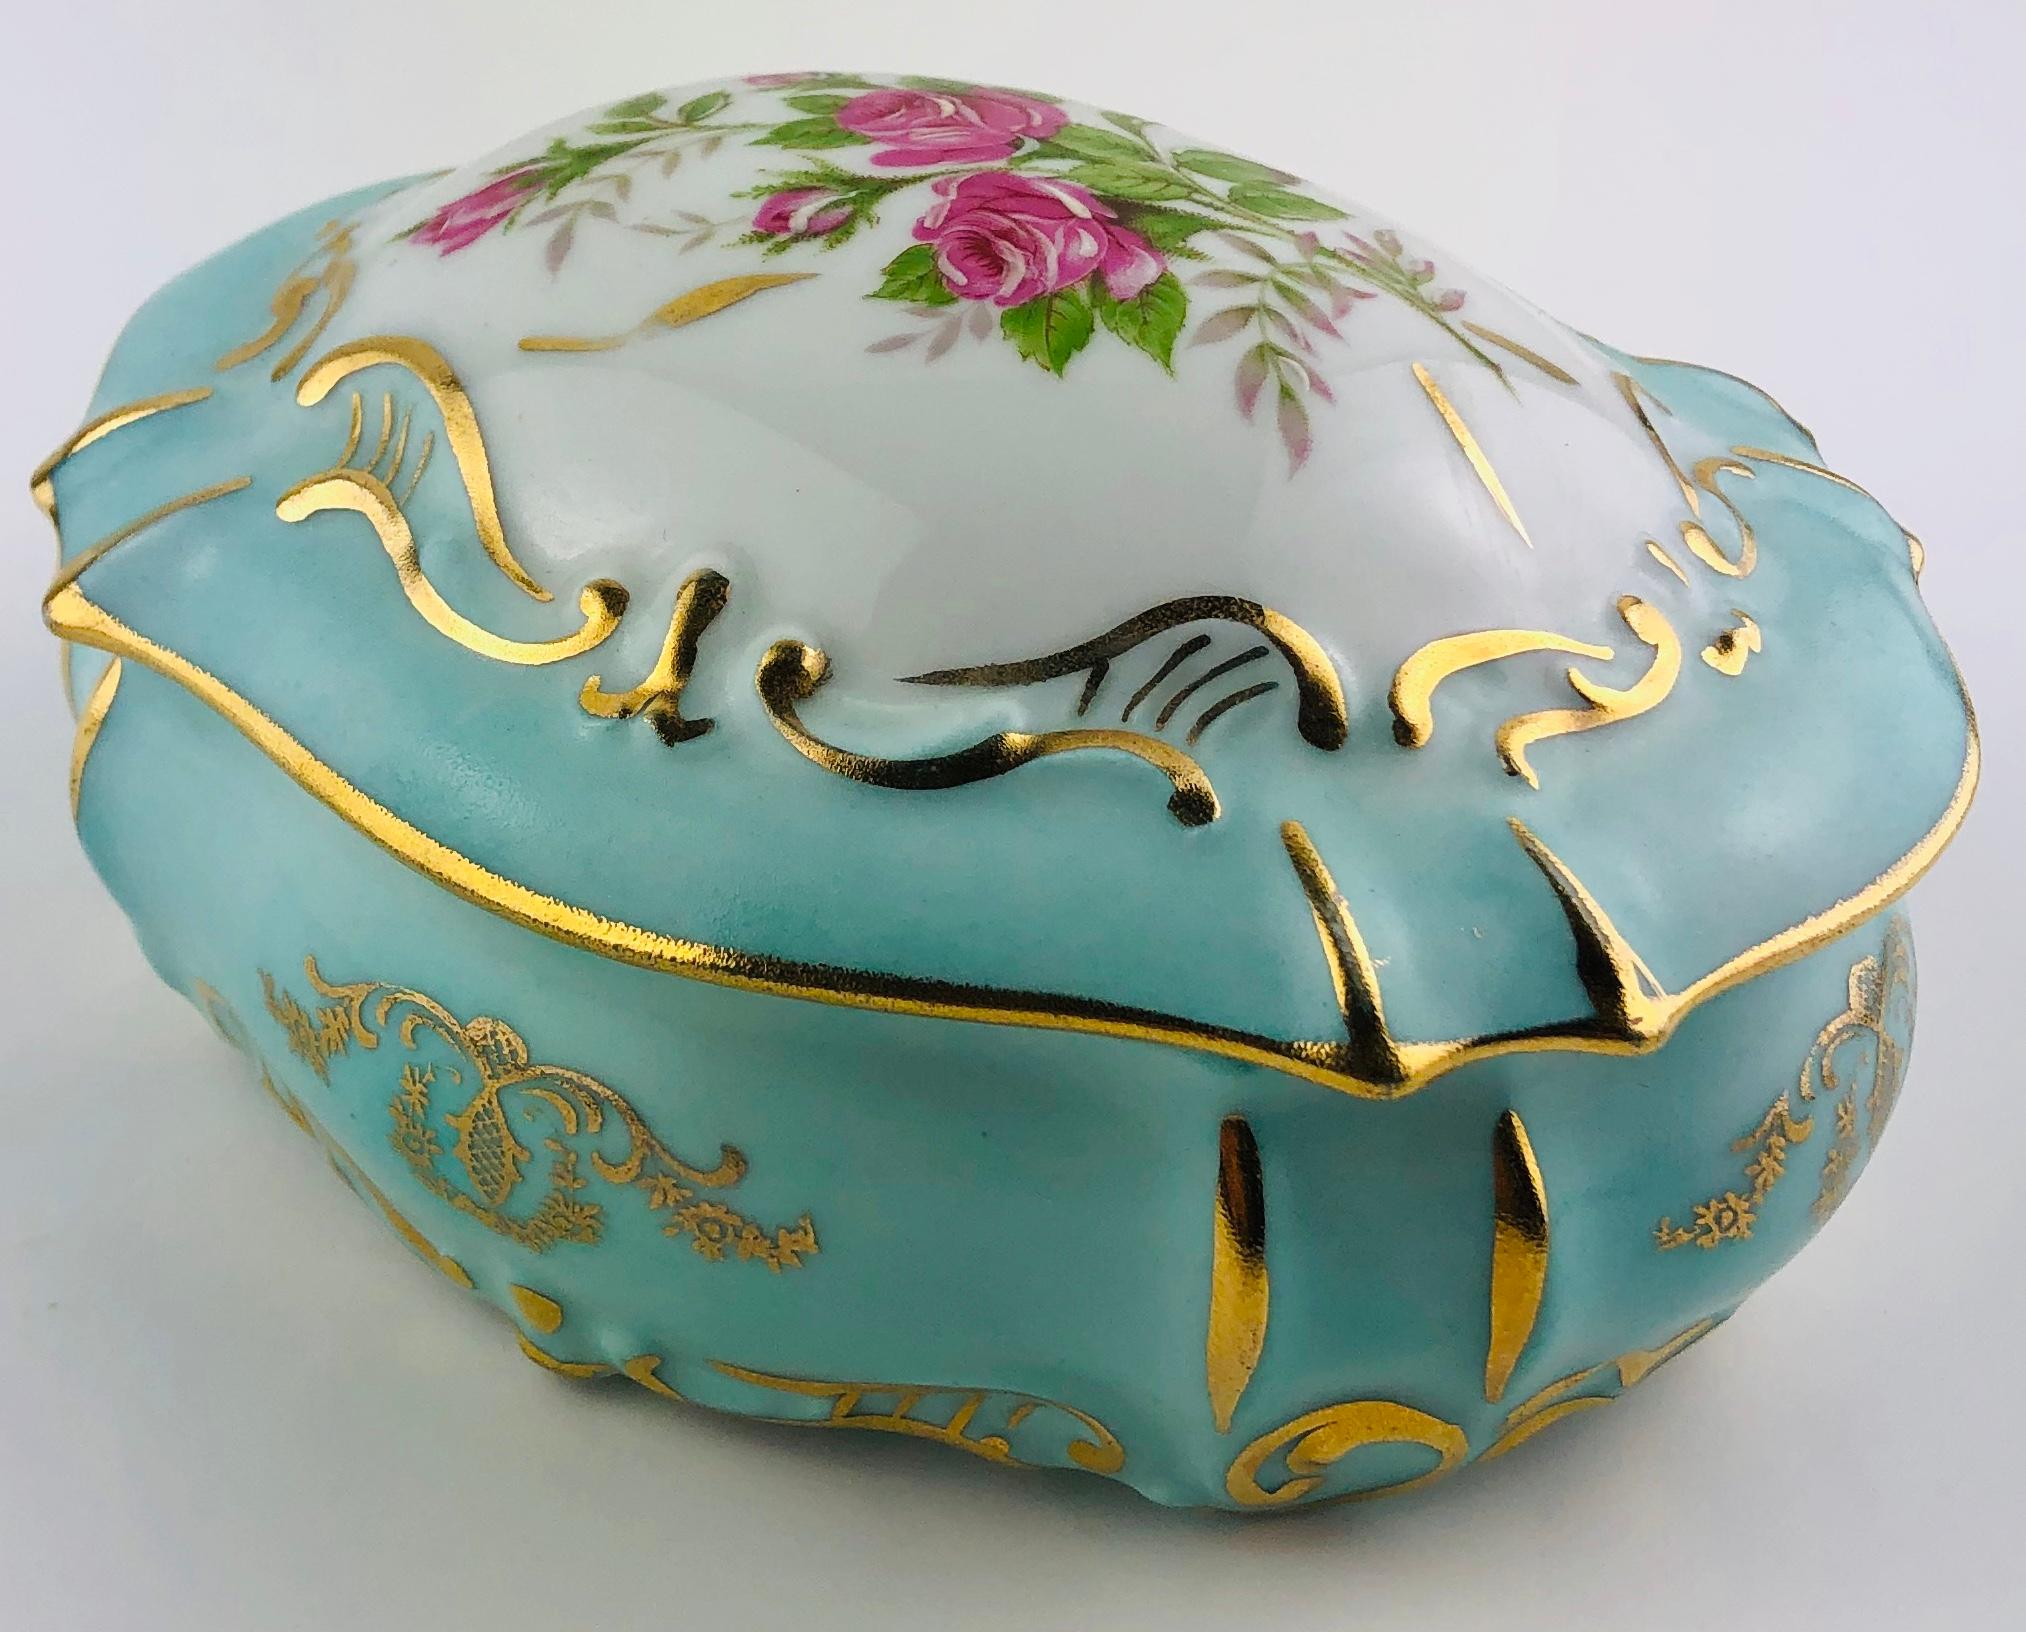 20th Century Exquisite French Limoges Hand Painted Gold Trim Trinket or Jewelry Box